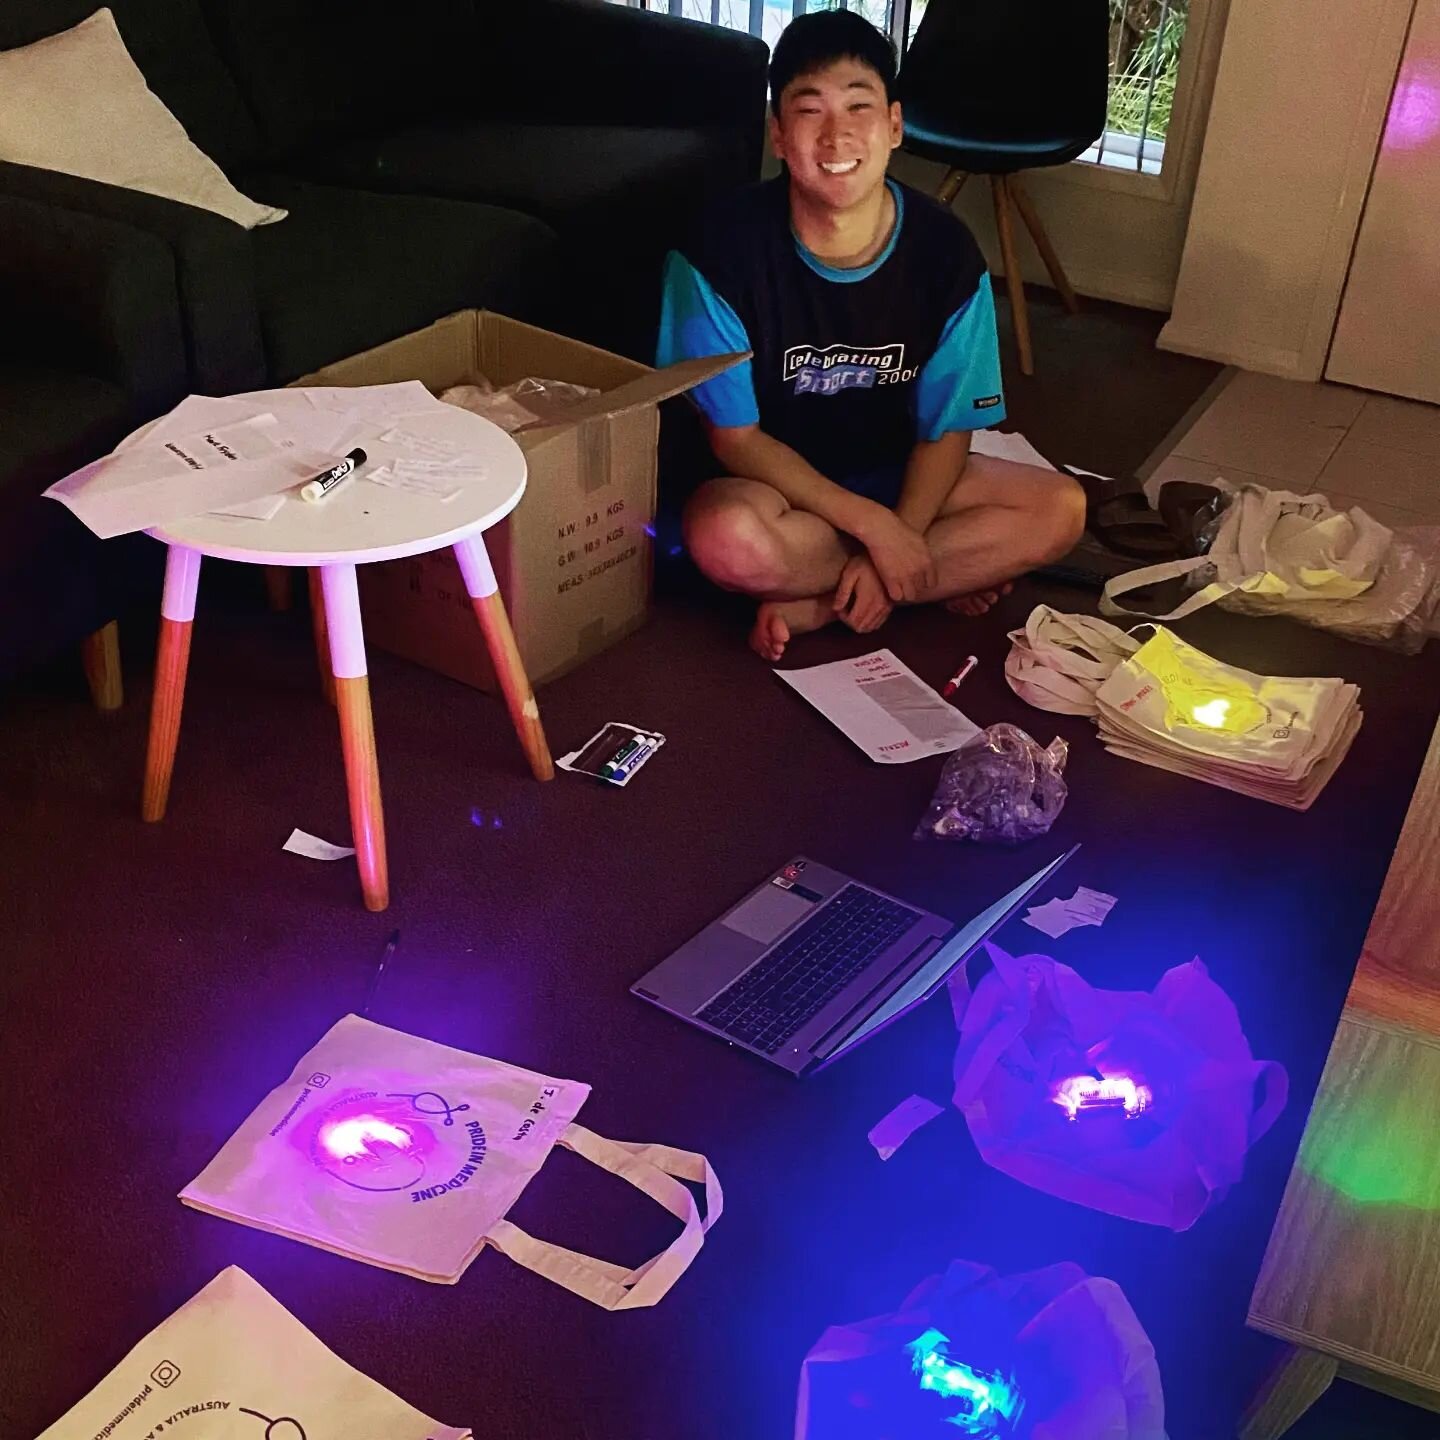 The countdown is on for #sydneymardigras - @jeycholol has been busy packing gear for our marchers. See the bright lights in person this Saturday!

#prideinmedicine #pride #mardisgras #lgbtdoctor #medicine #prideparade #sydney #medicalstudent #represe